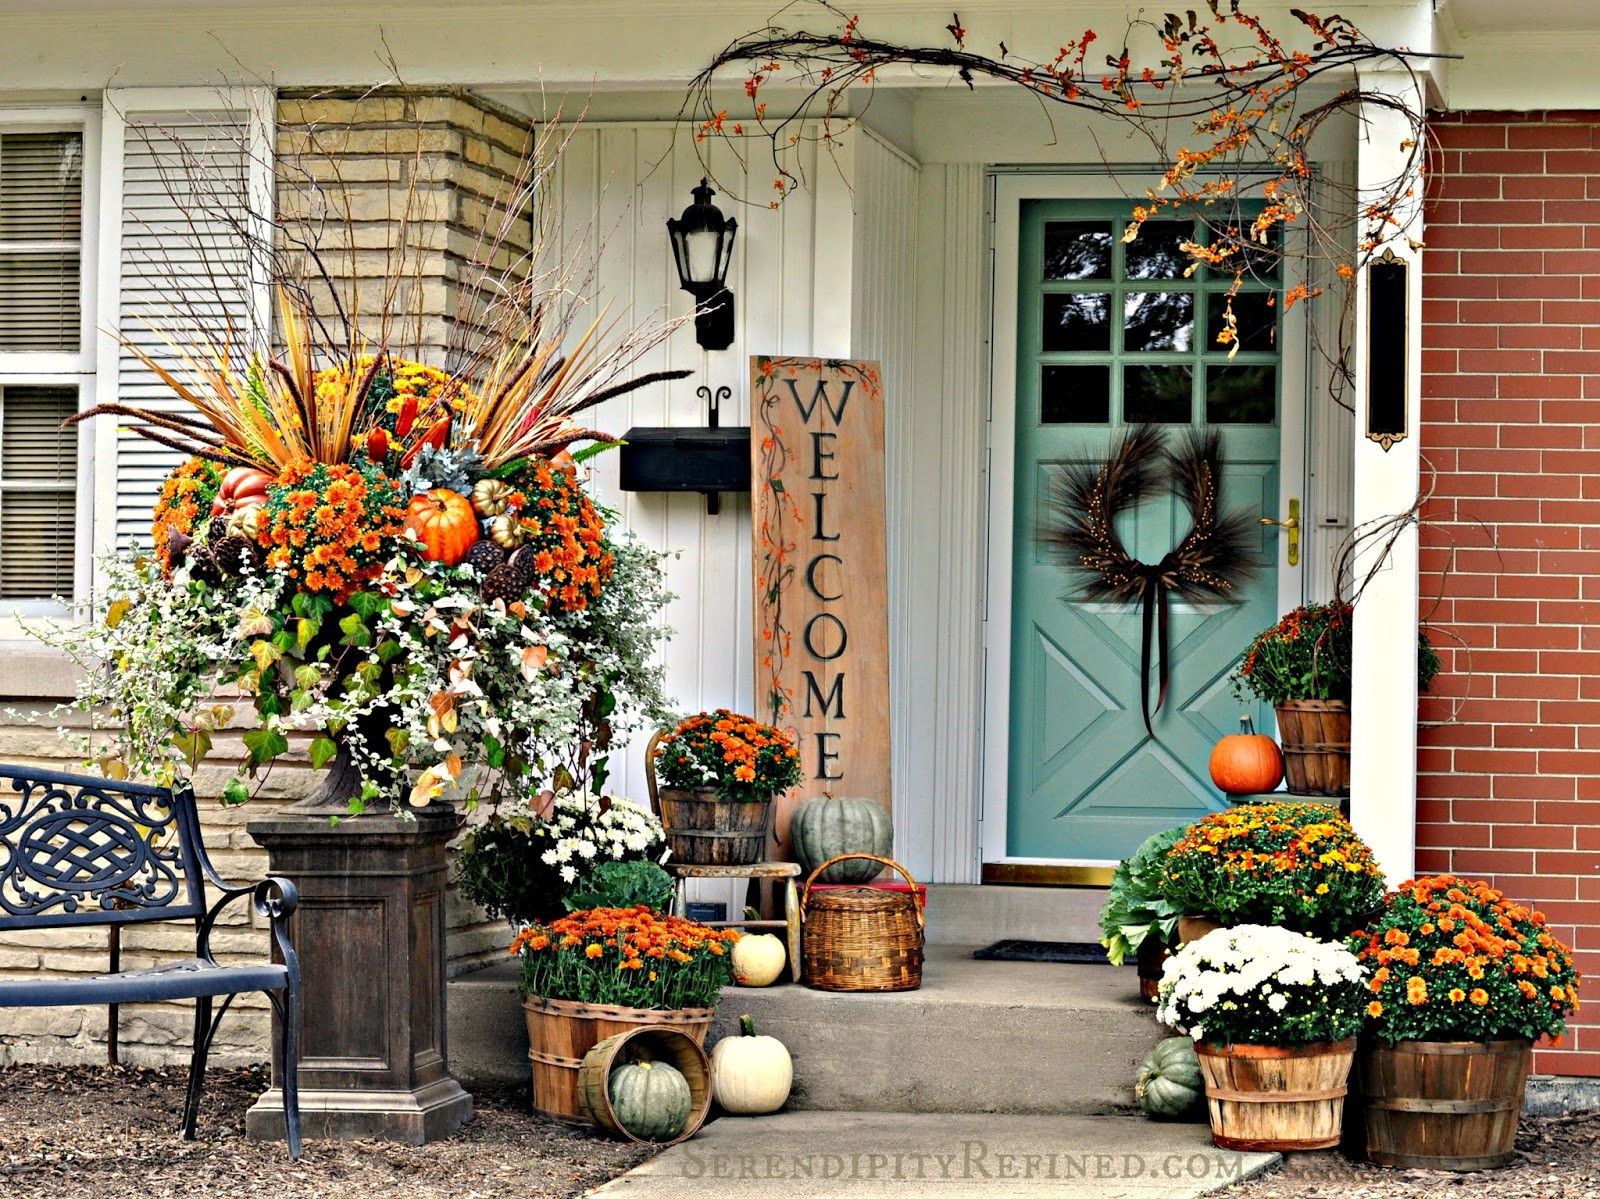 Outside Fall Decor Ideas
 Fabulous Outdoor Decorating Tips and Ideas for Fall ZING